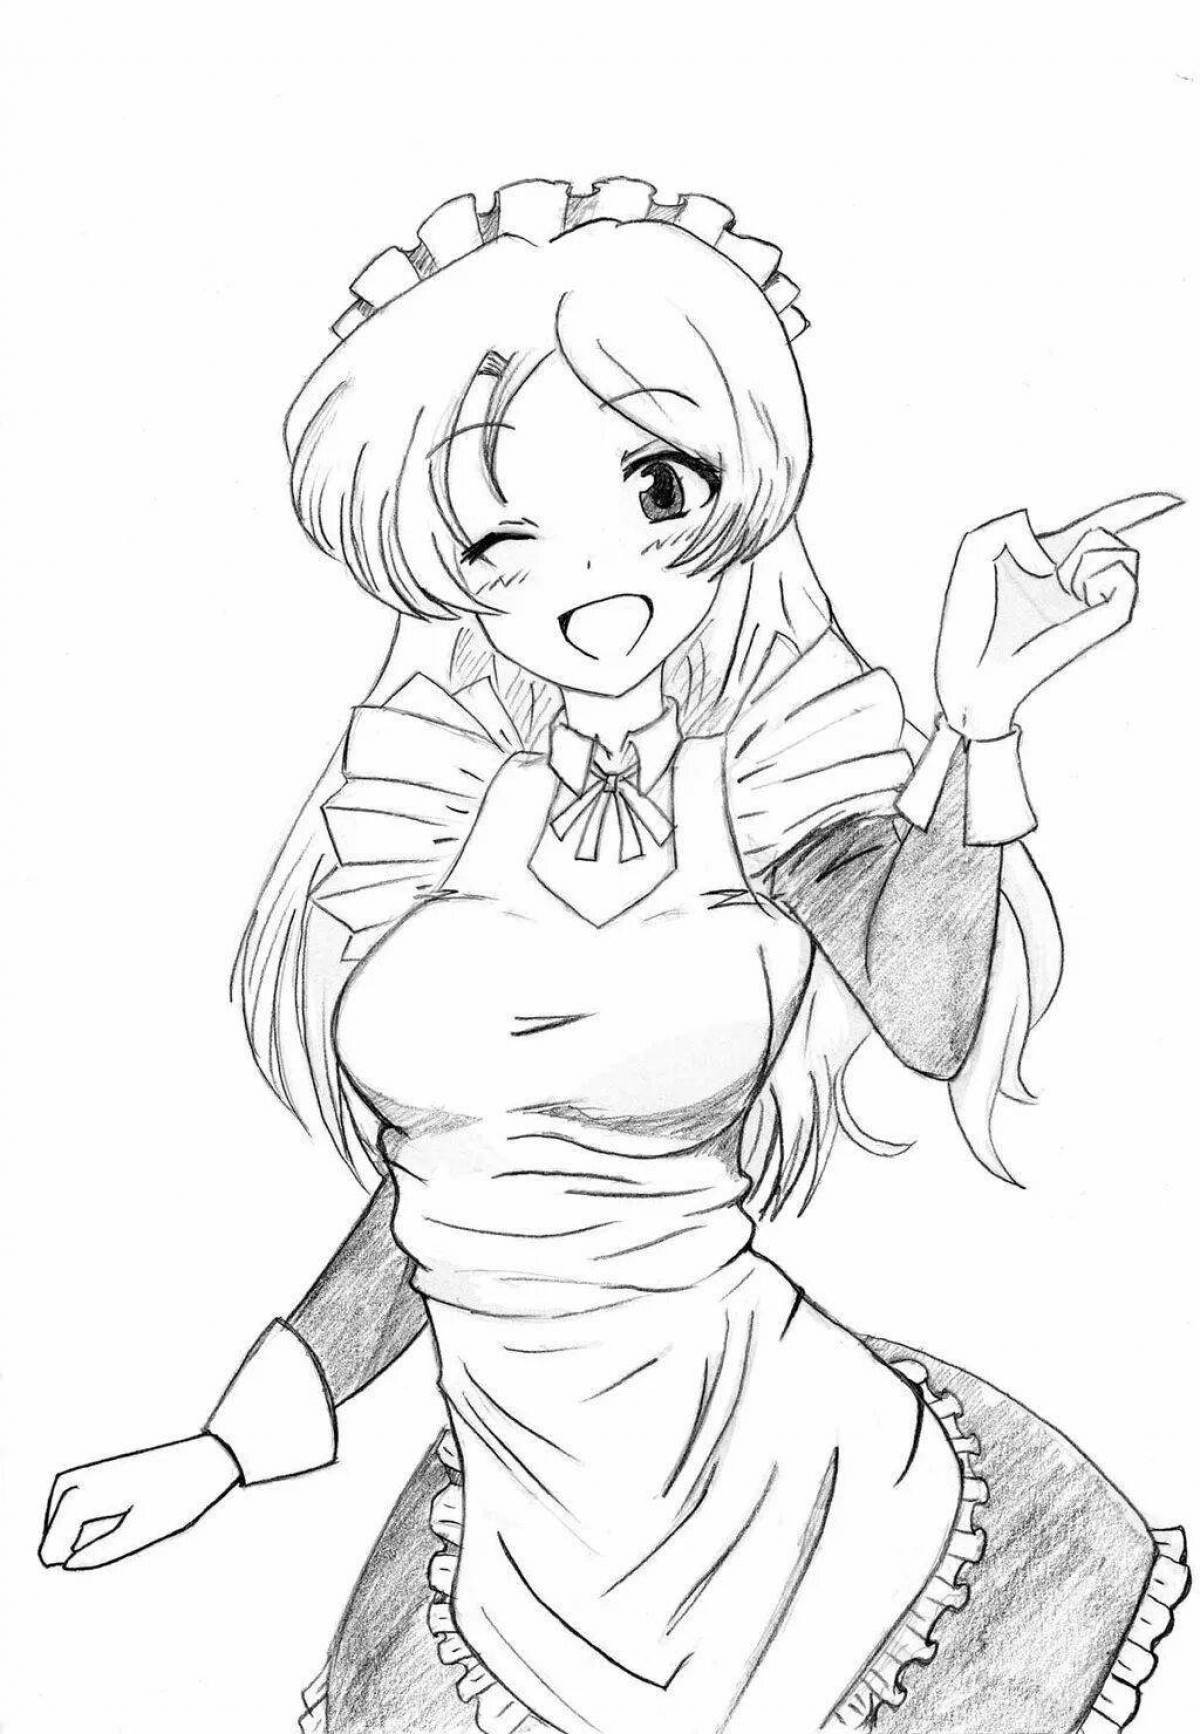 Coloring book shining anime maid